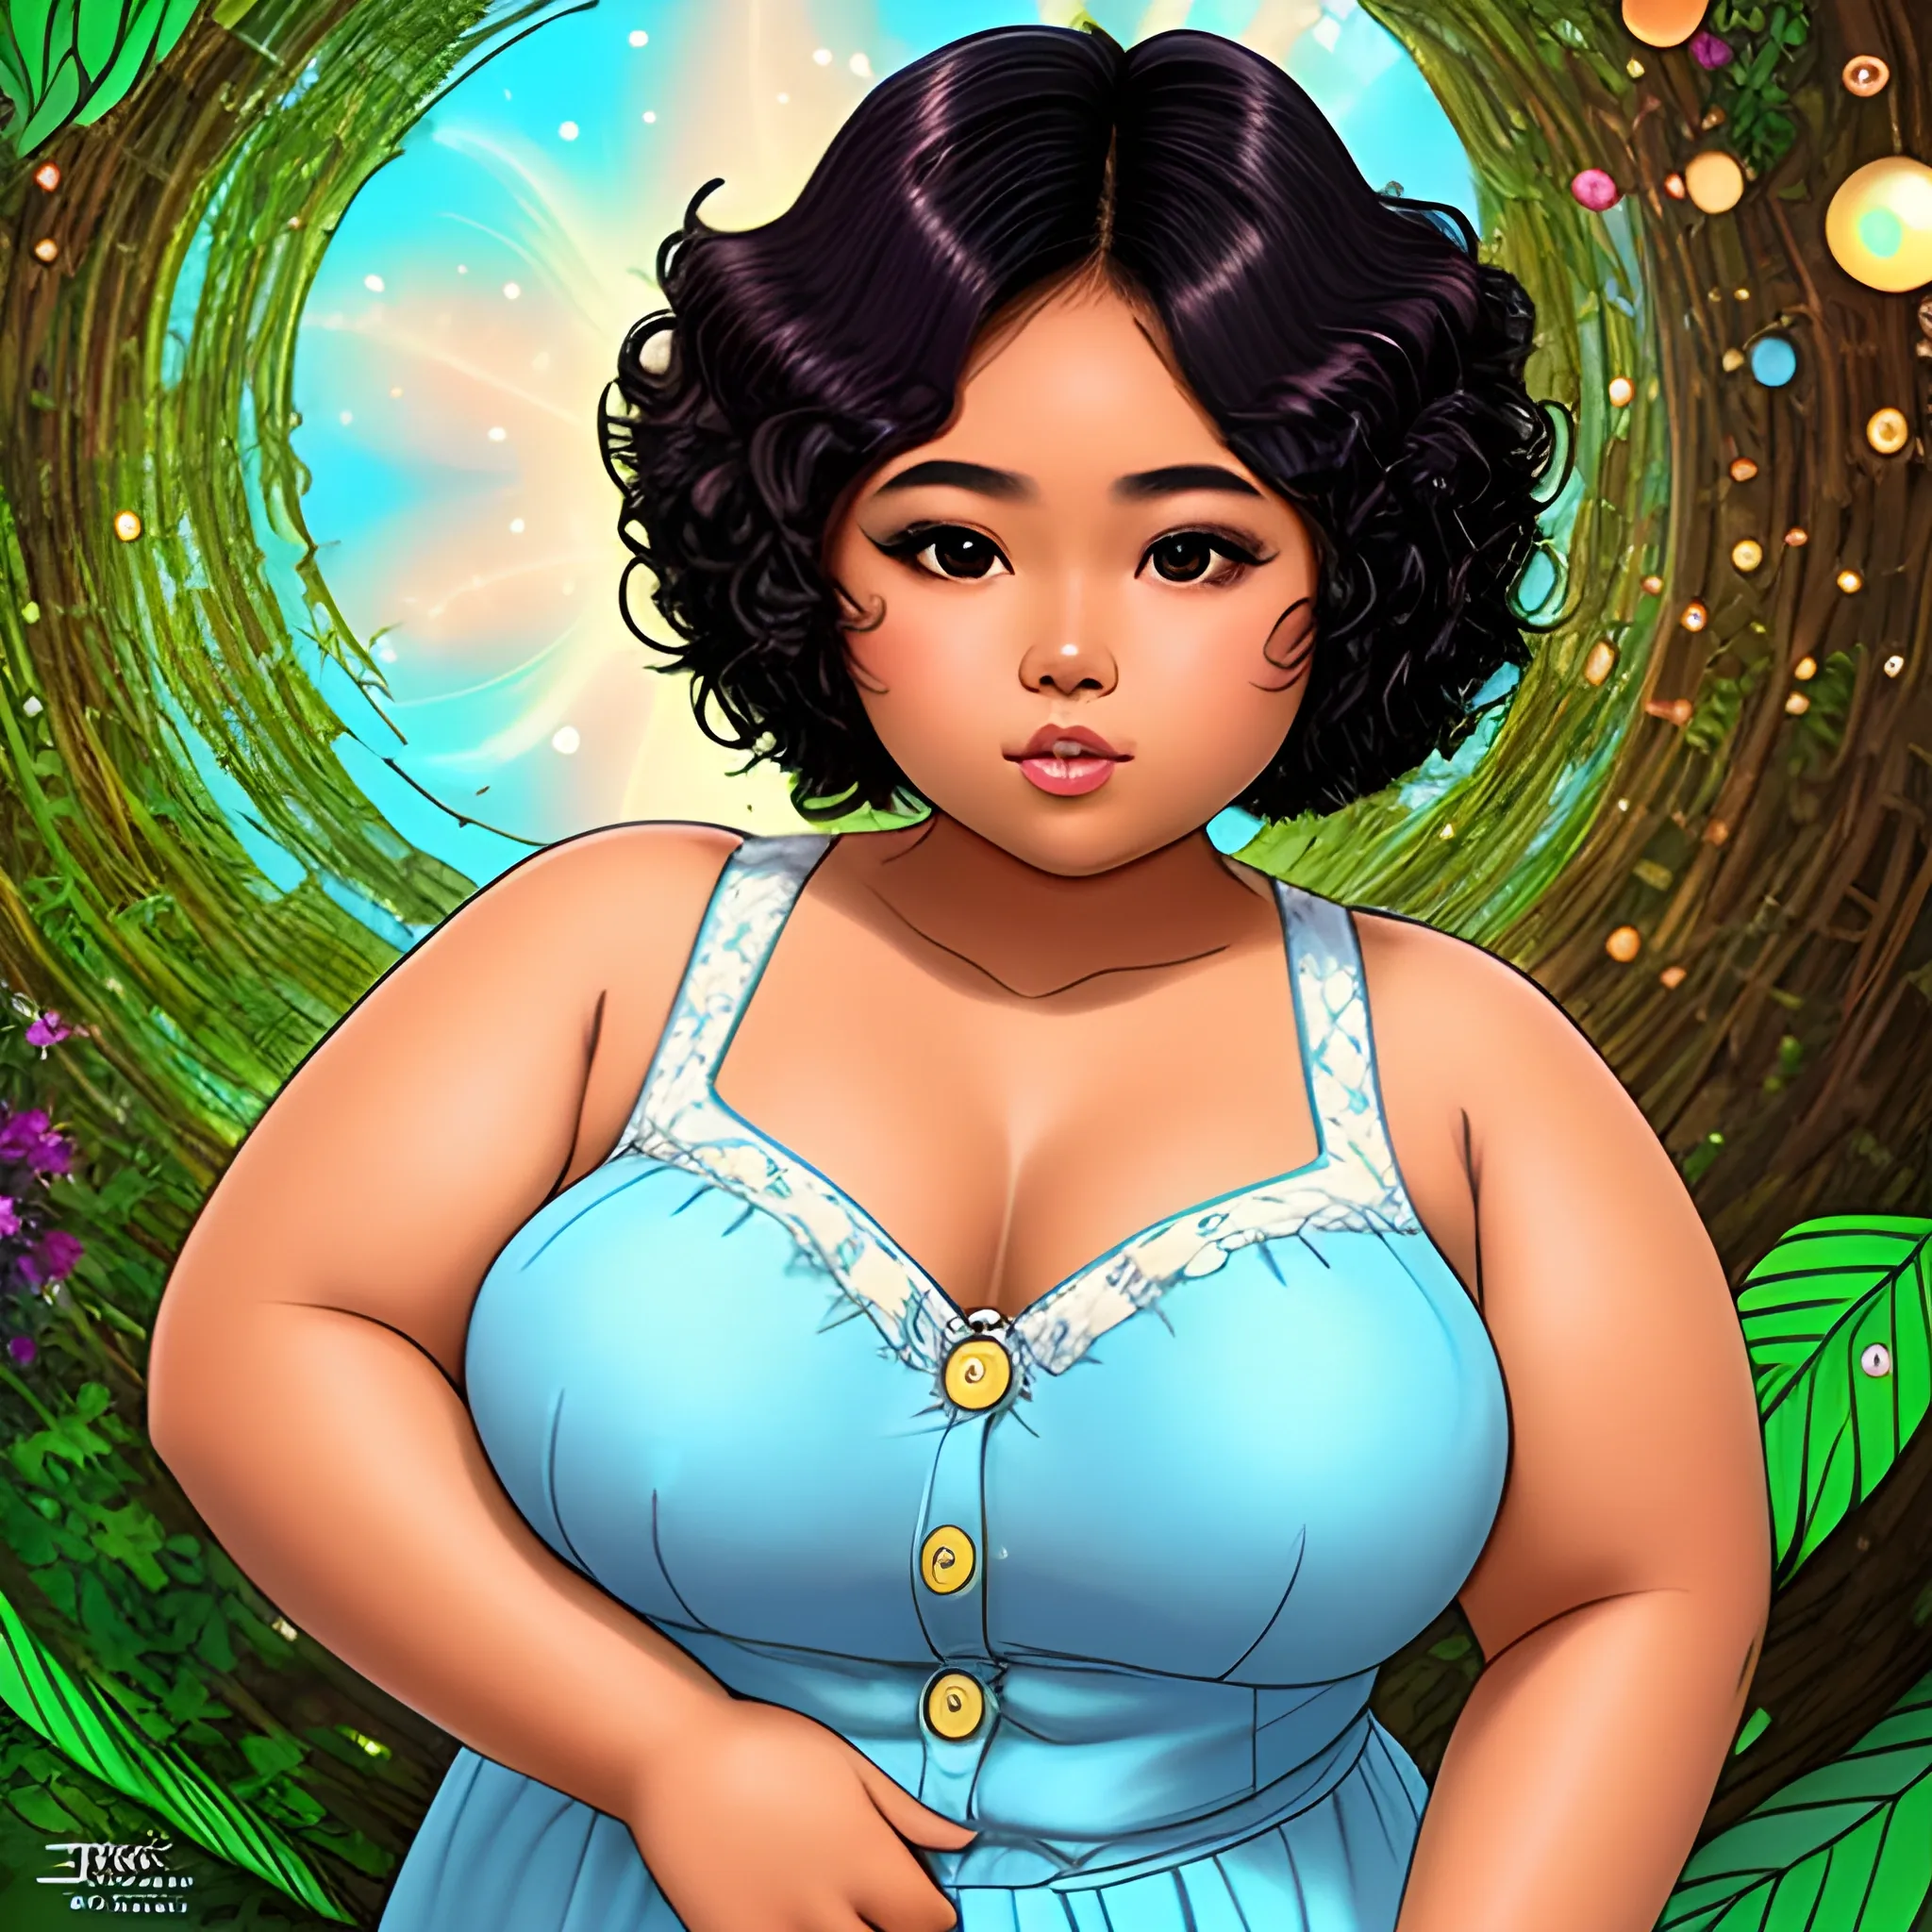 Thick tanned skin beautiful gorgeous chubby filipina woman, with a short curly hair, long eyelashes, big beautiful lips and flat button nose, fairy princess, Trippy